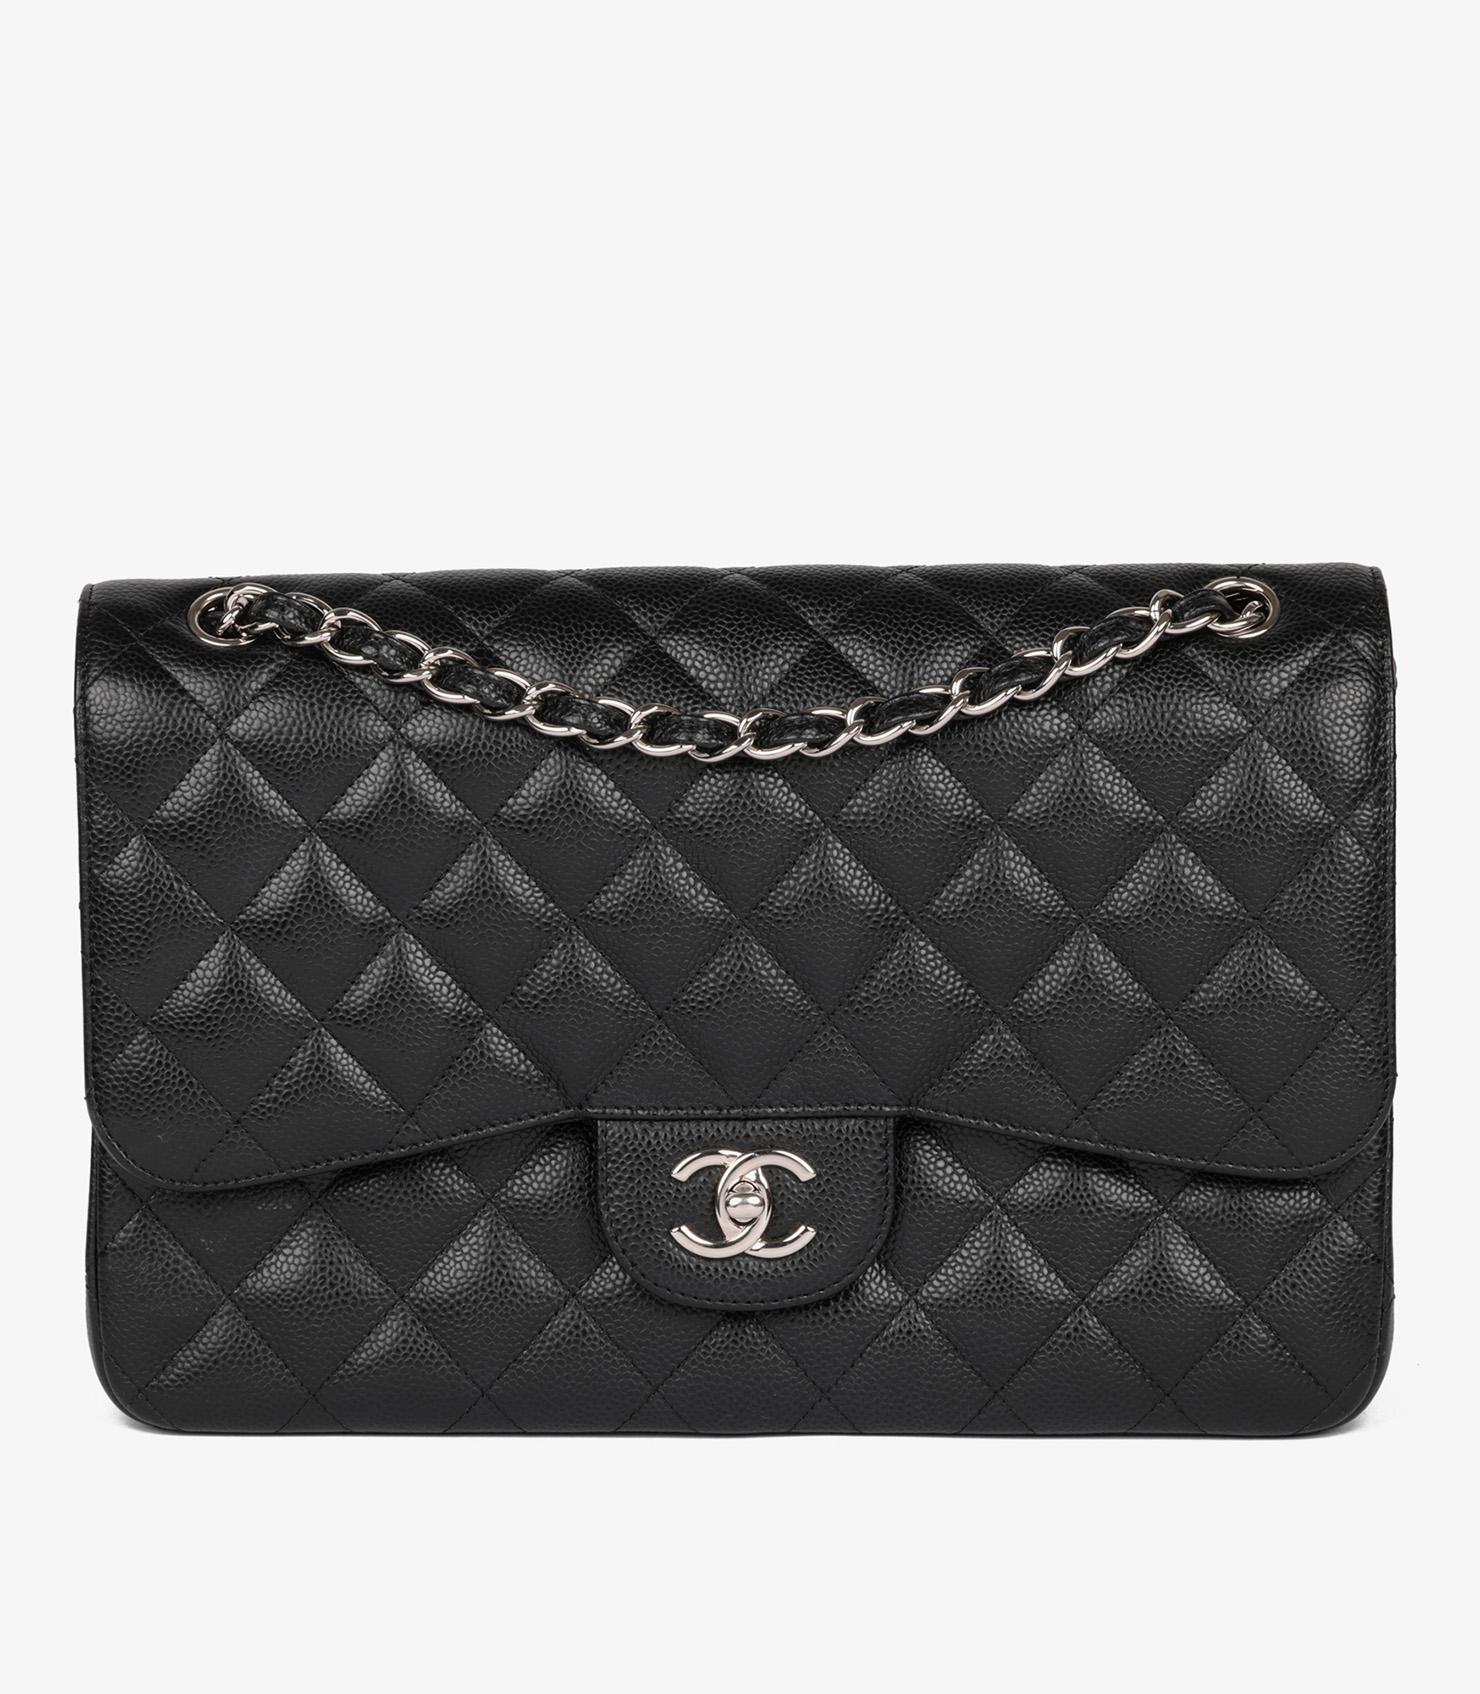 Chanel Black Caviar Leather Jumbo Classic Double Flap Bag

Brand- Chanel 
Model- Jumbo Classic Single Flap Bag
Product Type- Crossbody, Shoulder
Serial Number- 18895187
Age- Circa 2014
Accompanied By- Chanel Dust Bag, Authenticity Card, Care